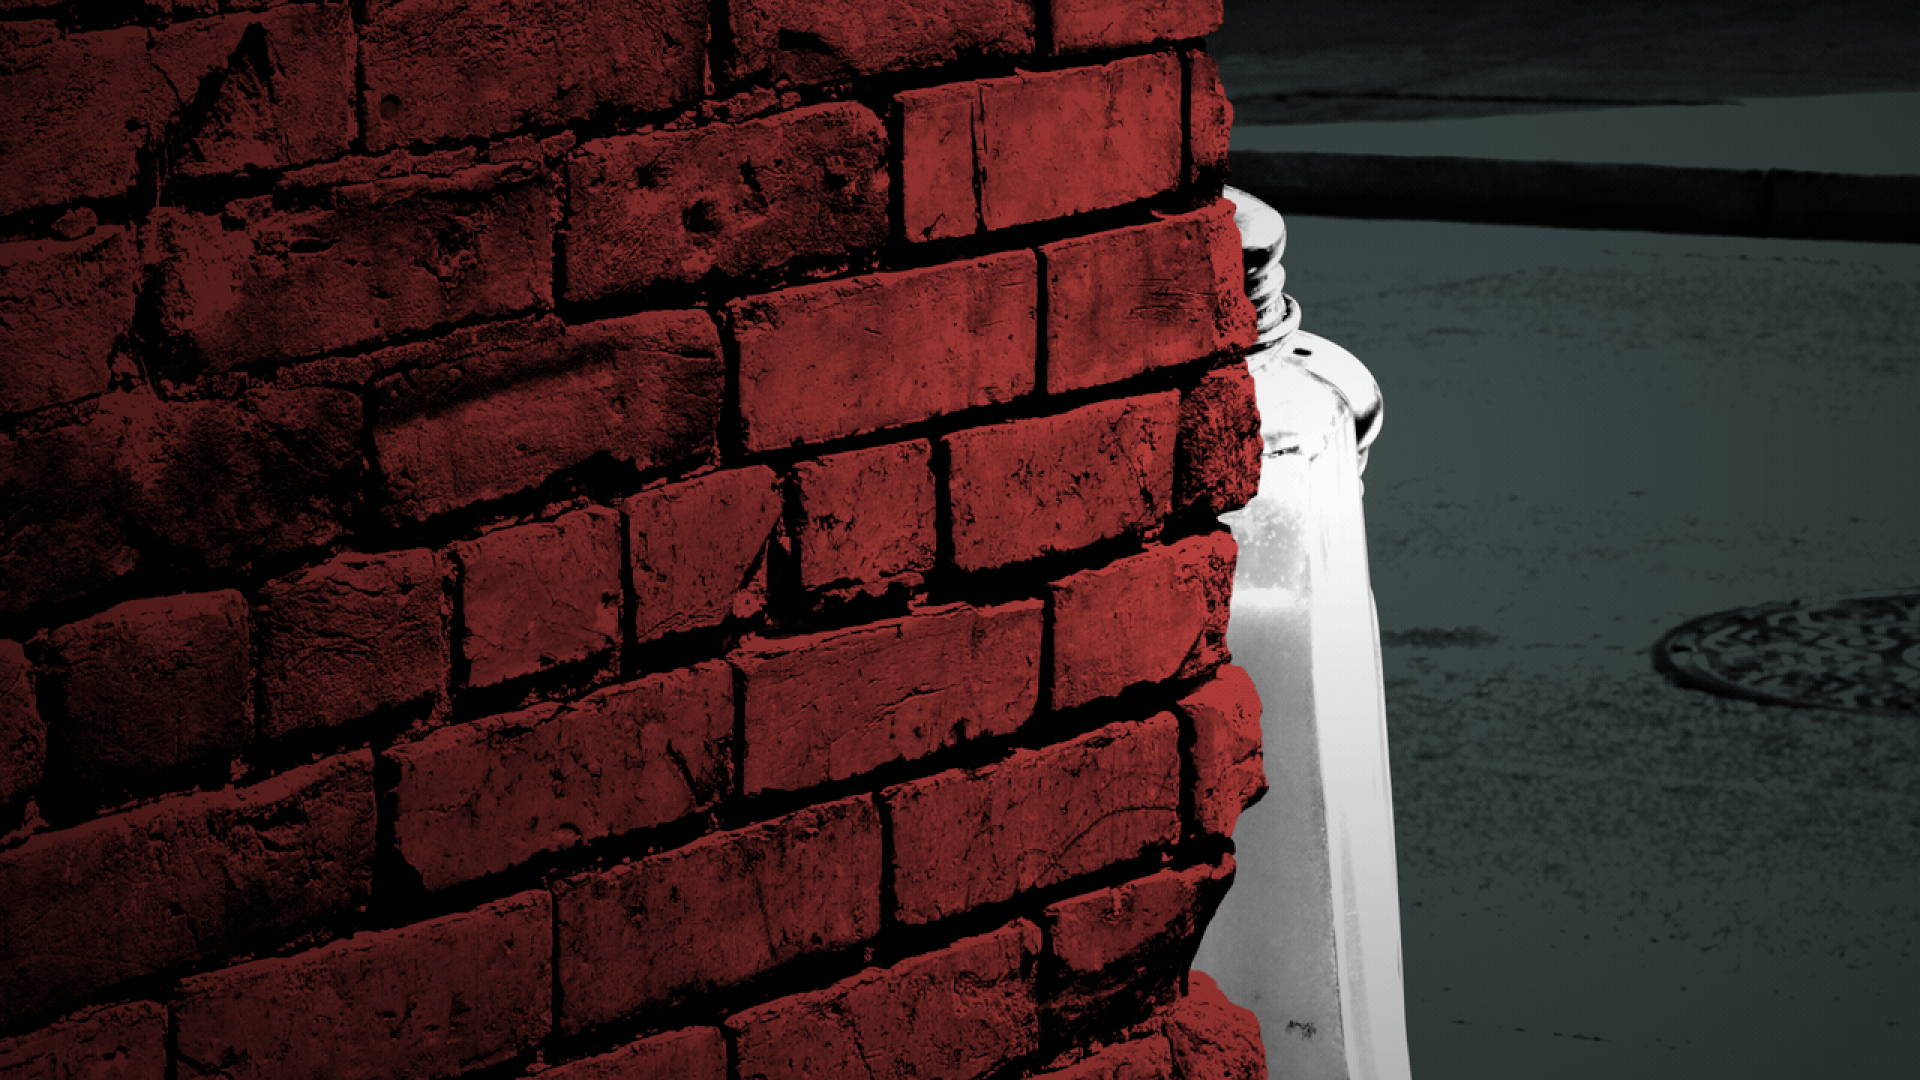 Illustration of salt and pepper shakers hiding behind a brick wall, and peeking around it.